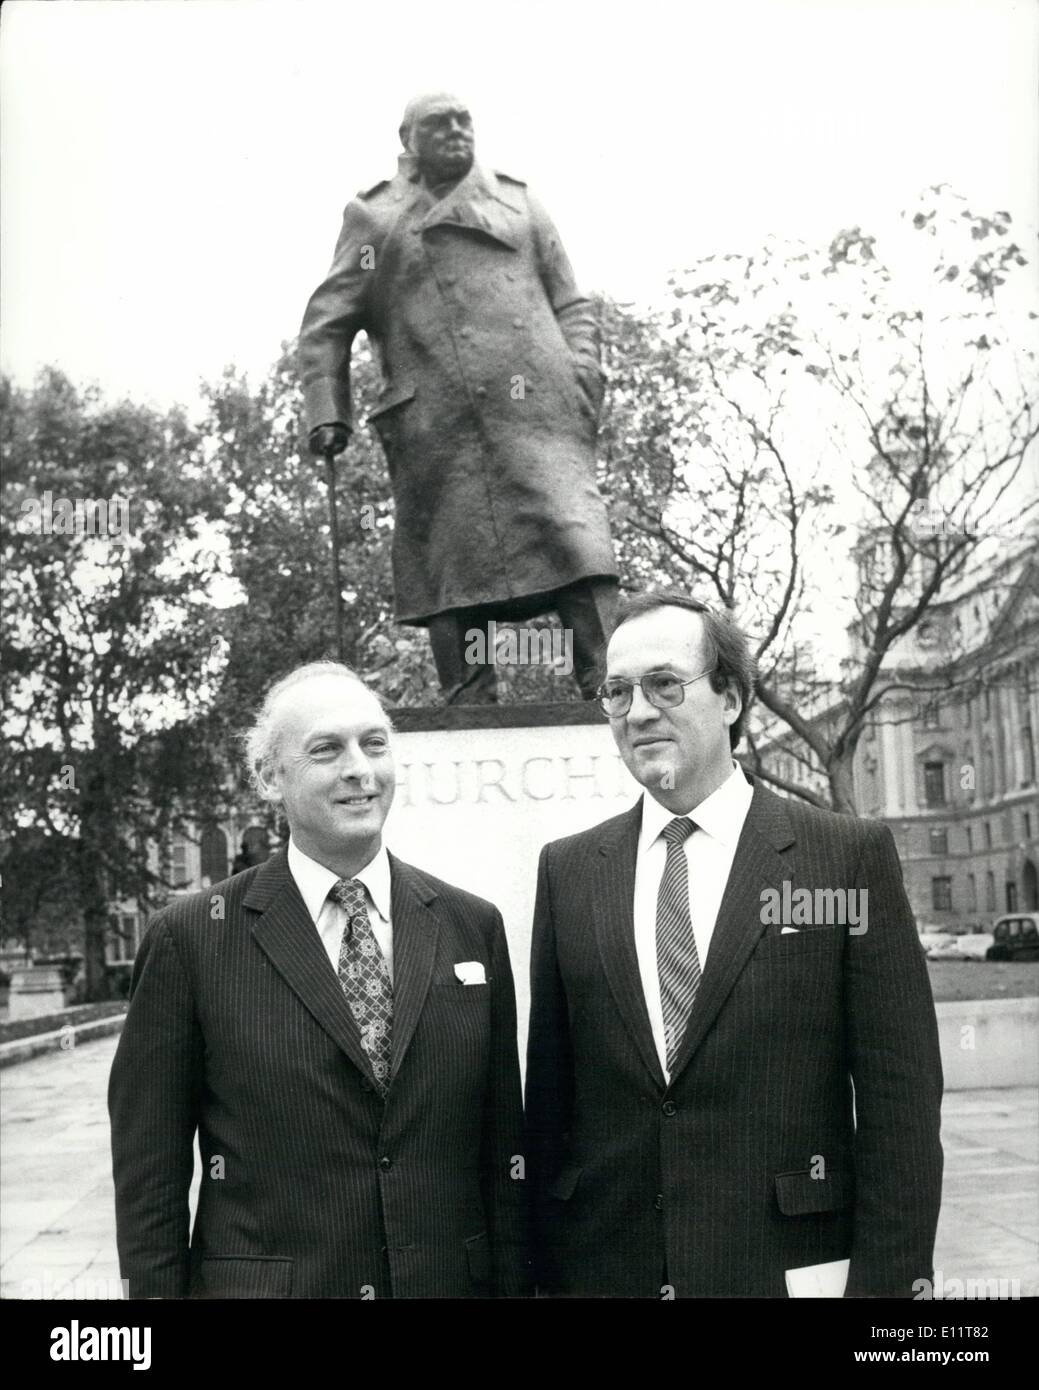 Nov. 11, 1979 - A Monty Meets A Rommel: The two sons of two principal war-time adversaries meeting beneath the gaze of Sir Winston Churchill in London yesterday. Viscount Montgomery of Alamein (left), 51, son of Field Marshal Viscount Montgomery. and Herr Manfred Rommel, 50 son of Field Marshal Erwin Rommel, who is now Lord Mayor of Stttgart, Herr Rommel is in Britain as a guest of the Government to study development of inner cities and transport and traffic control Stock Photo